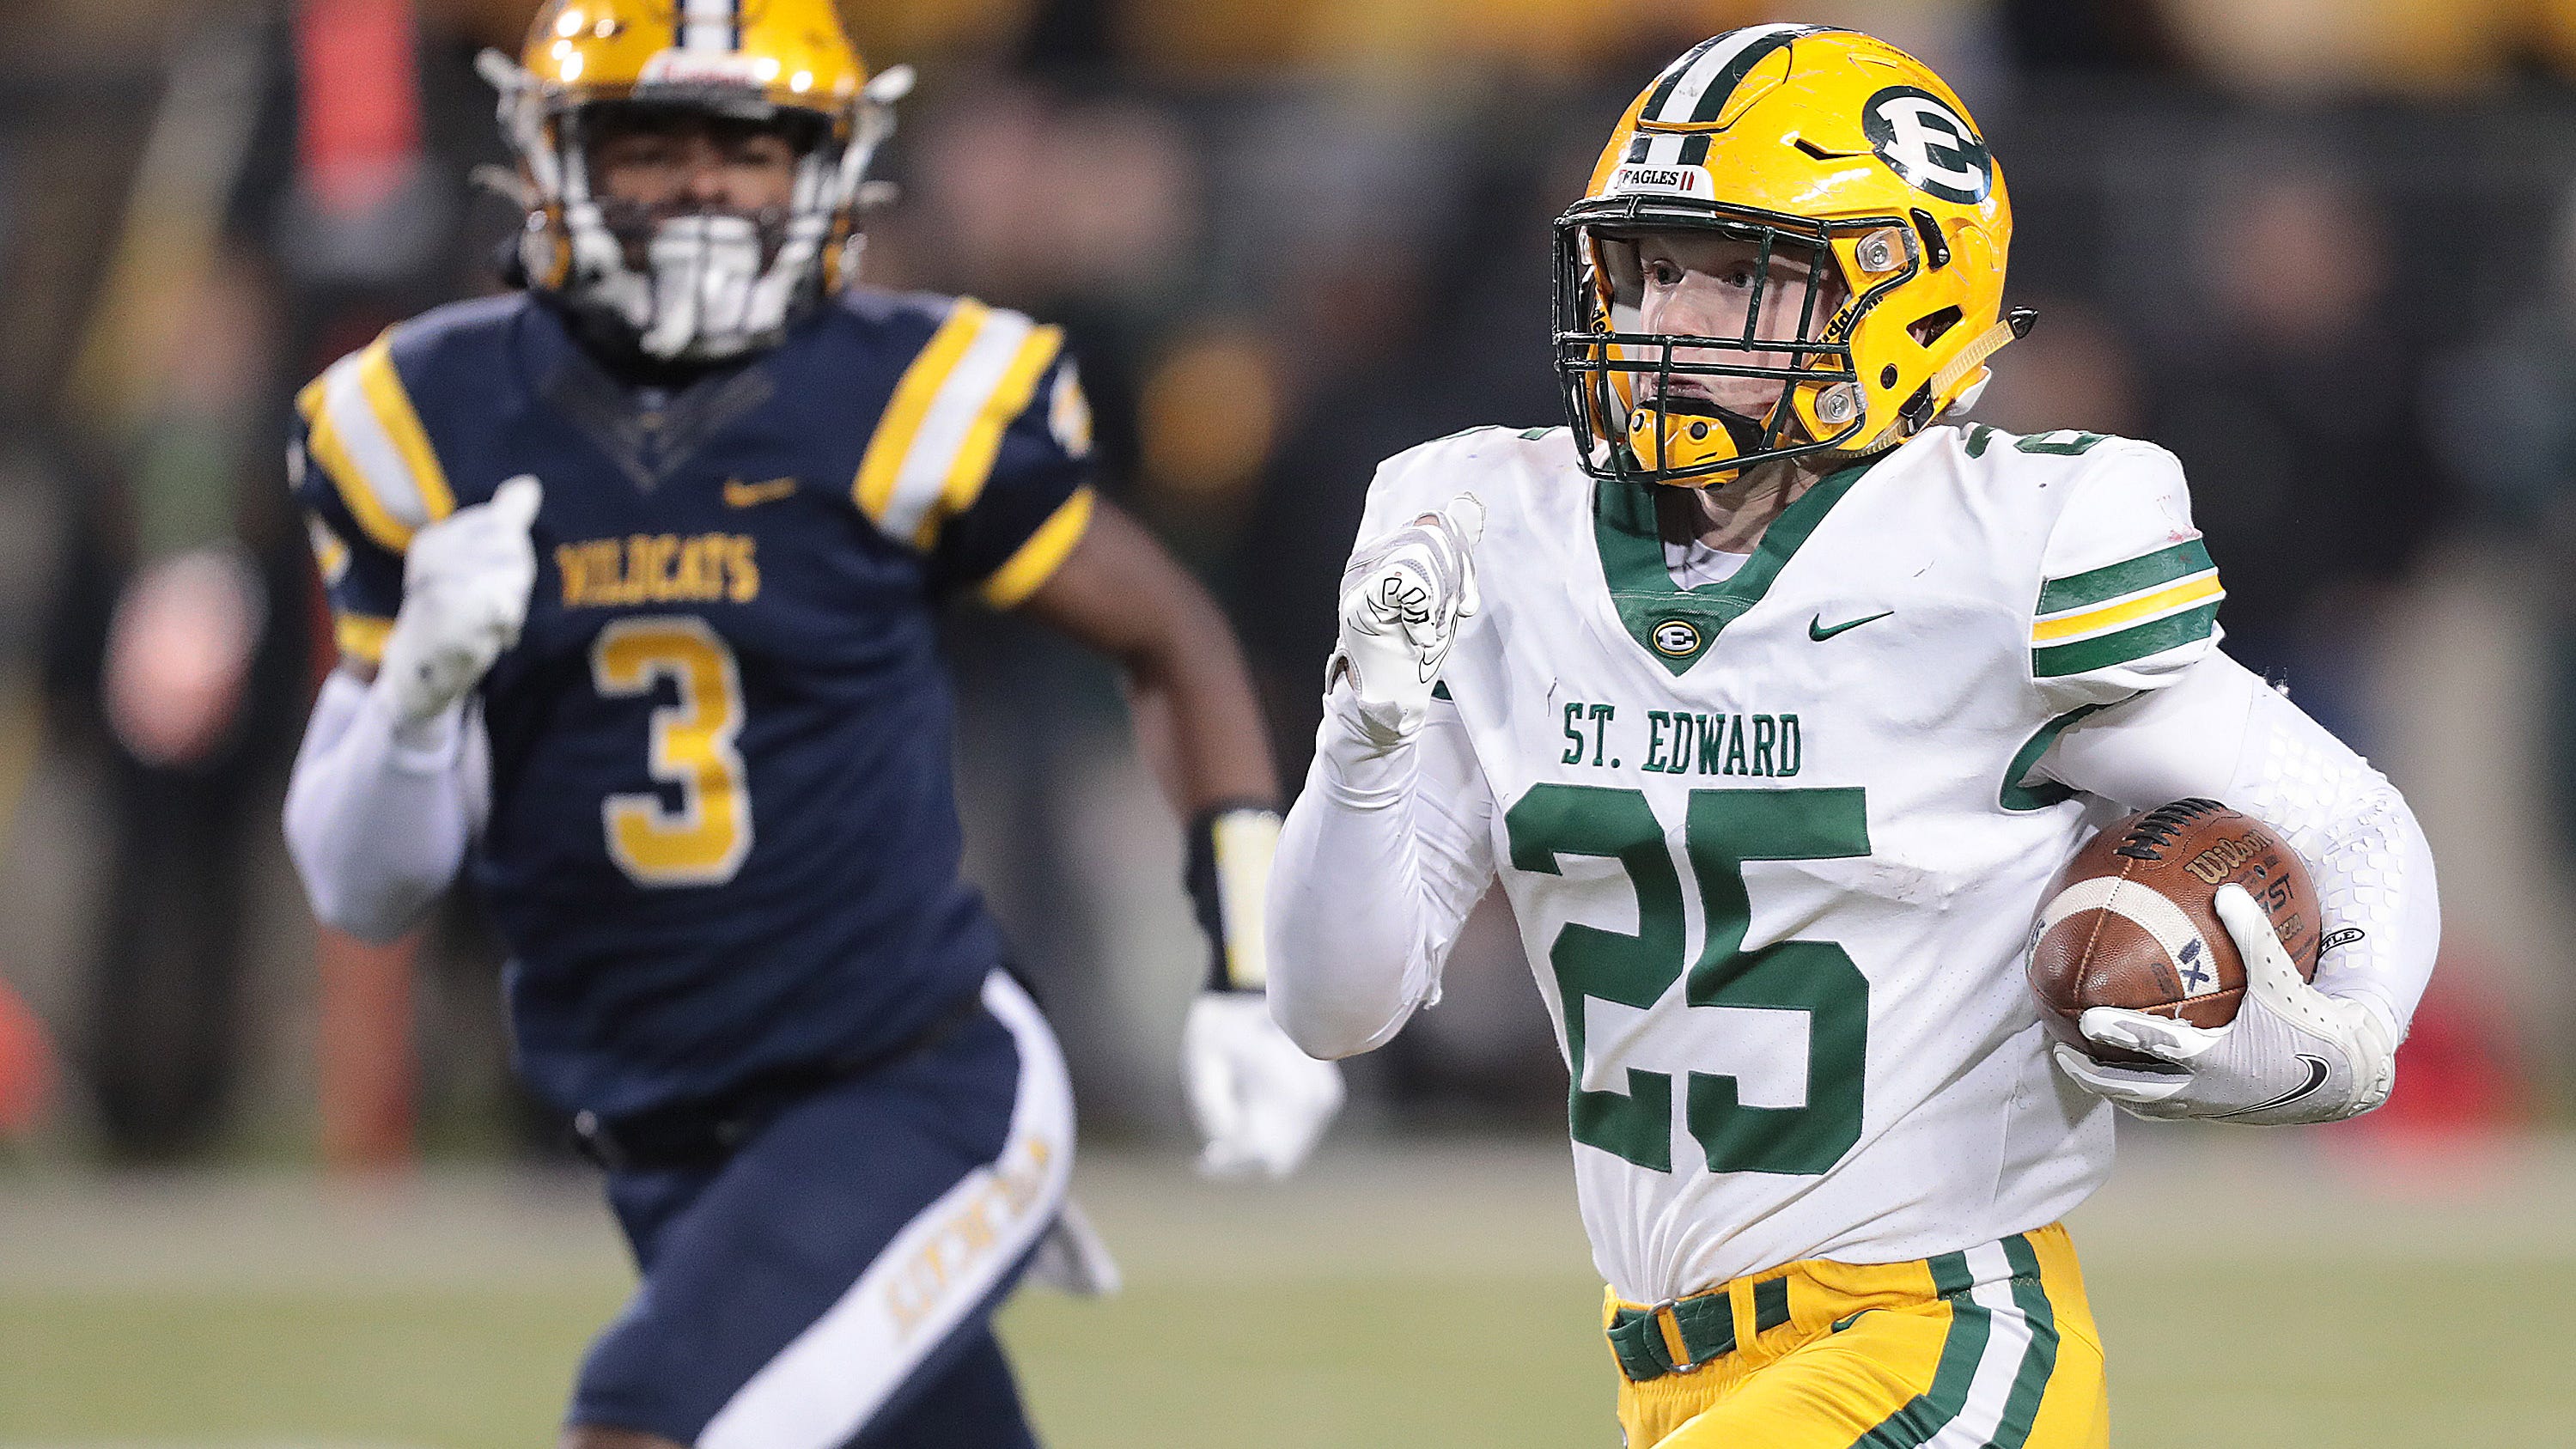 Danny Enovitch leads St. Edward football to OHSAA state title